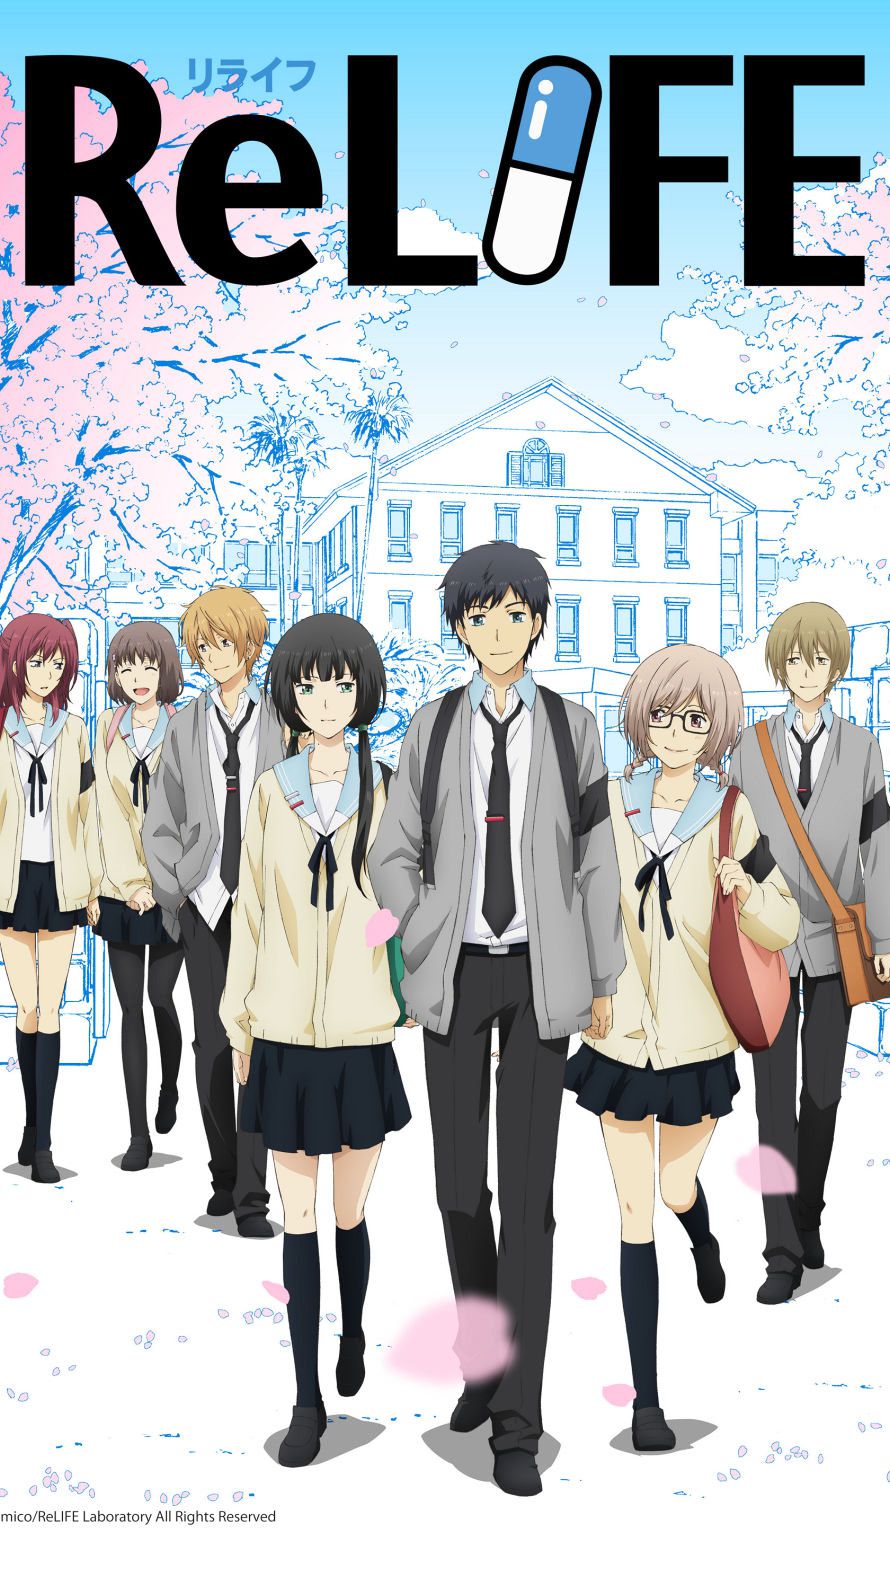 Relife Iphone壁紙画像 Androidスマホ壁紙 1 Iphone6 Iphone5s アニメ壁紙ネット Pc Android Iphone壁紙 画像